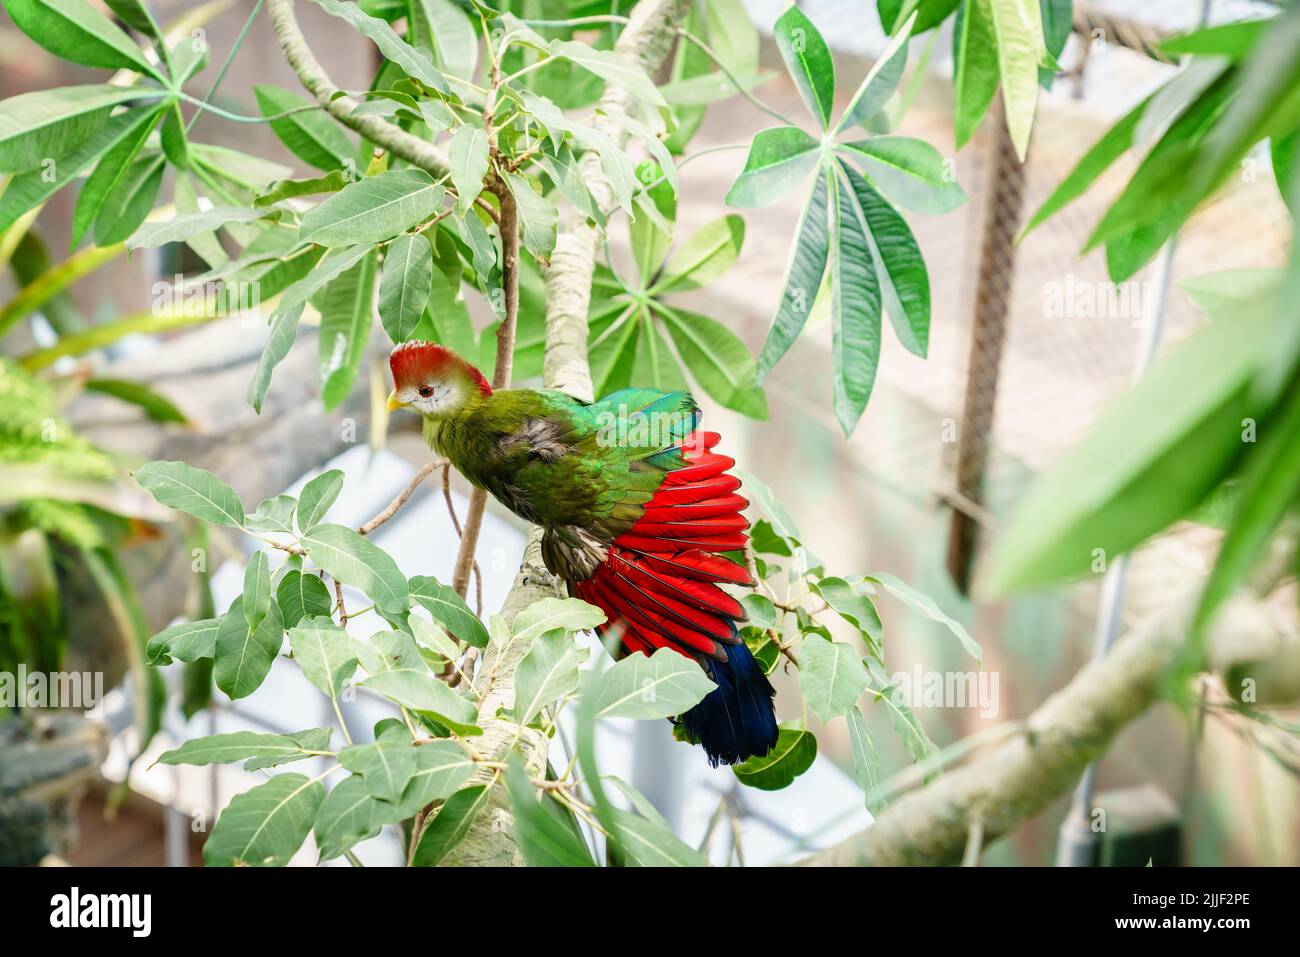 Portrait of Red-crested turaco in a bird sanctuary Stock Photo